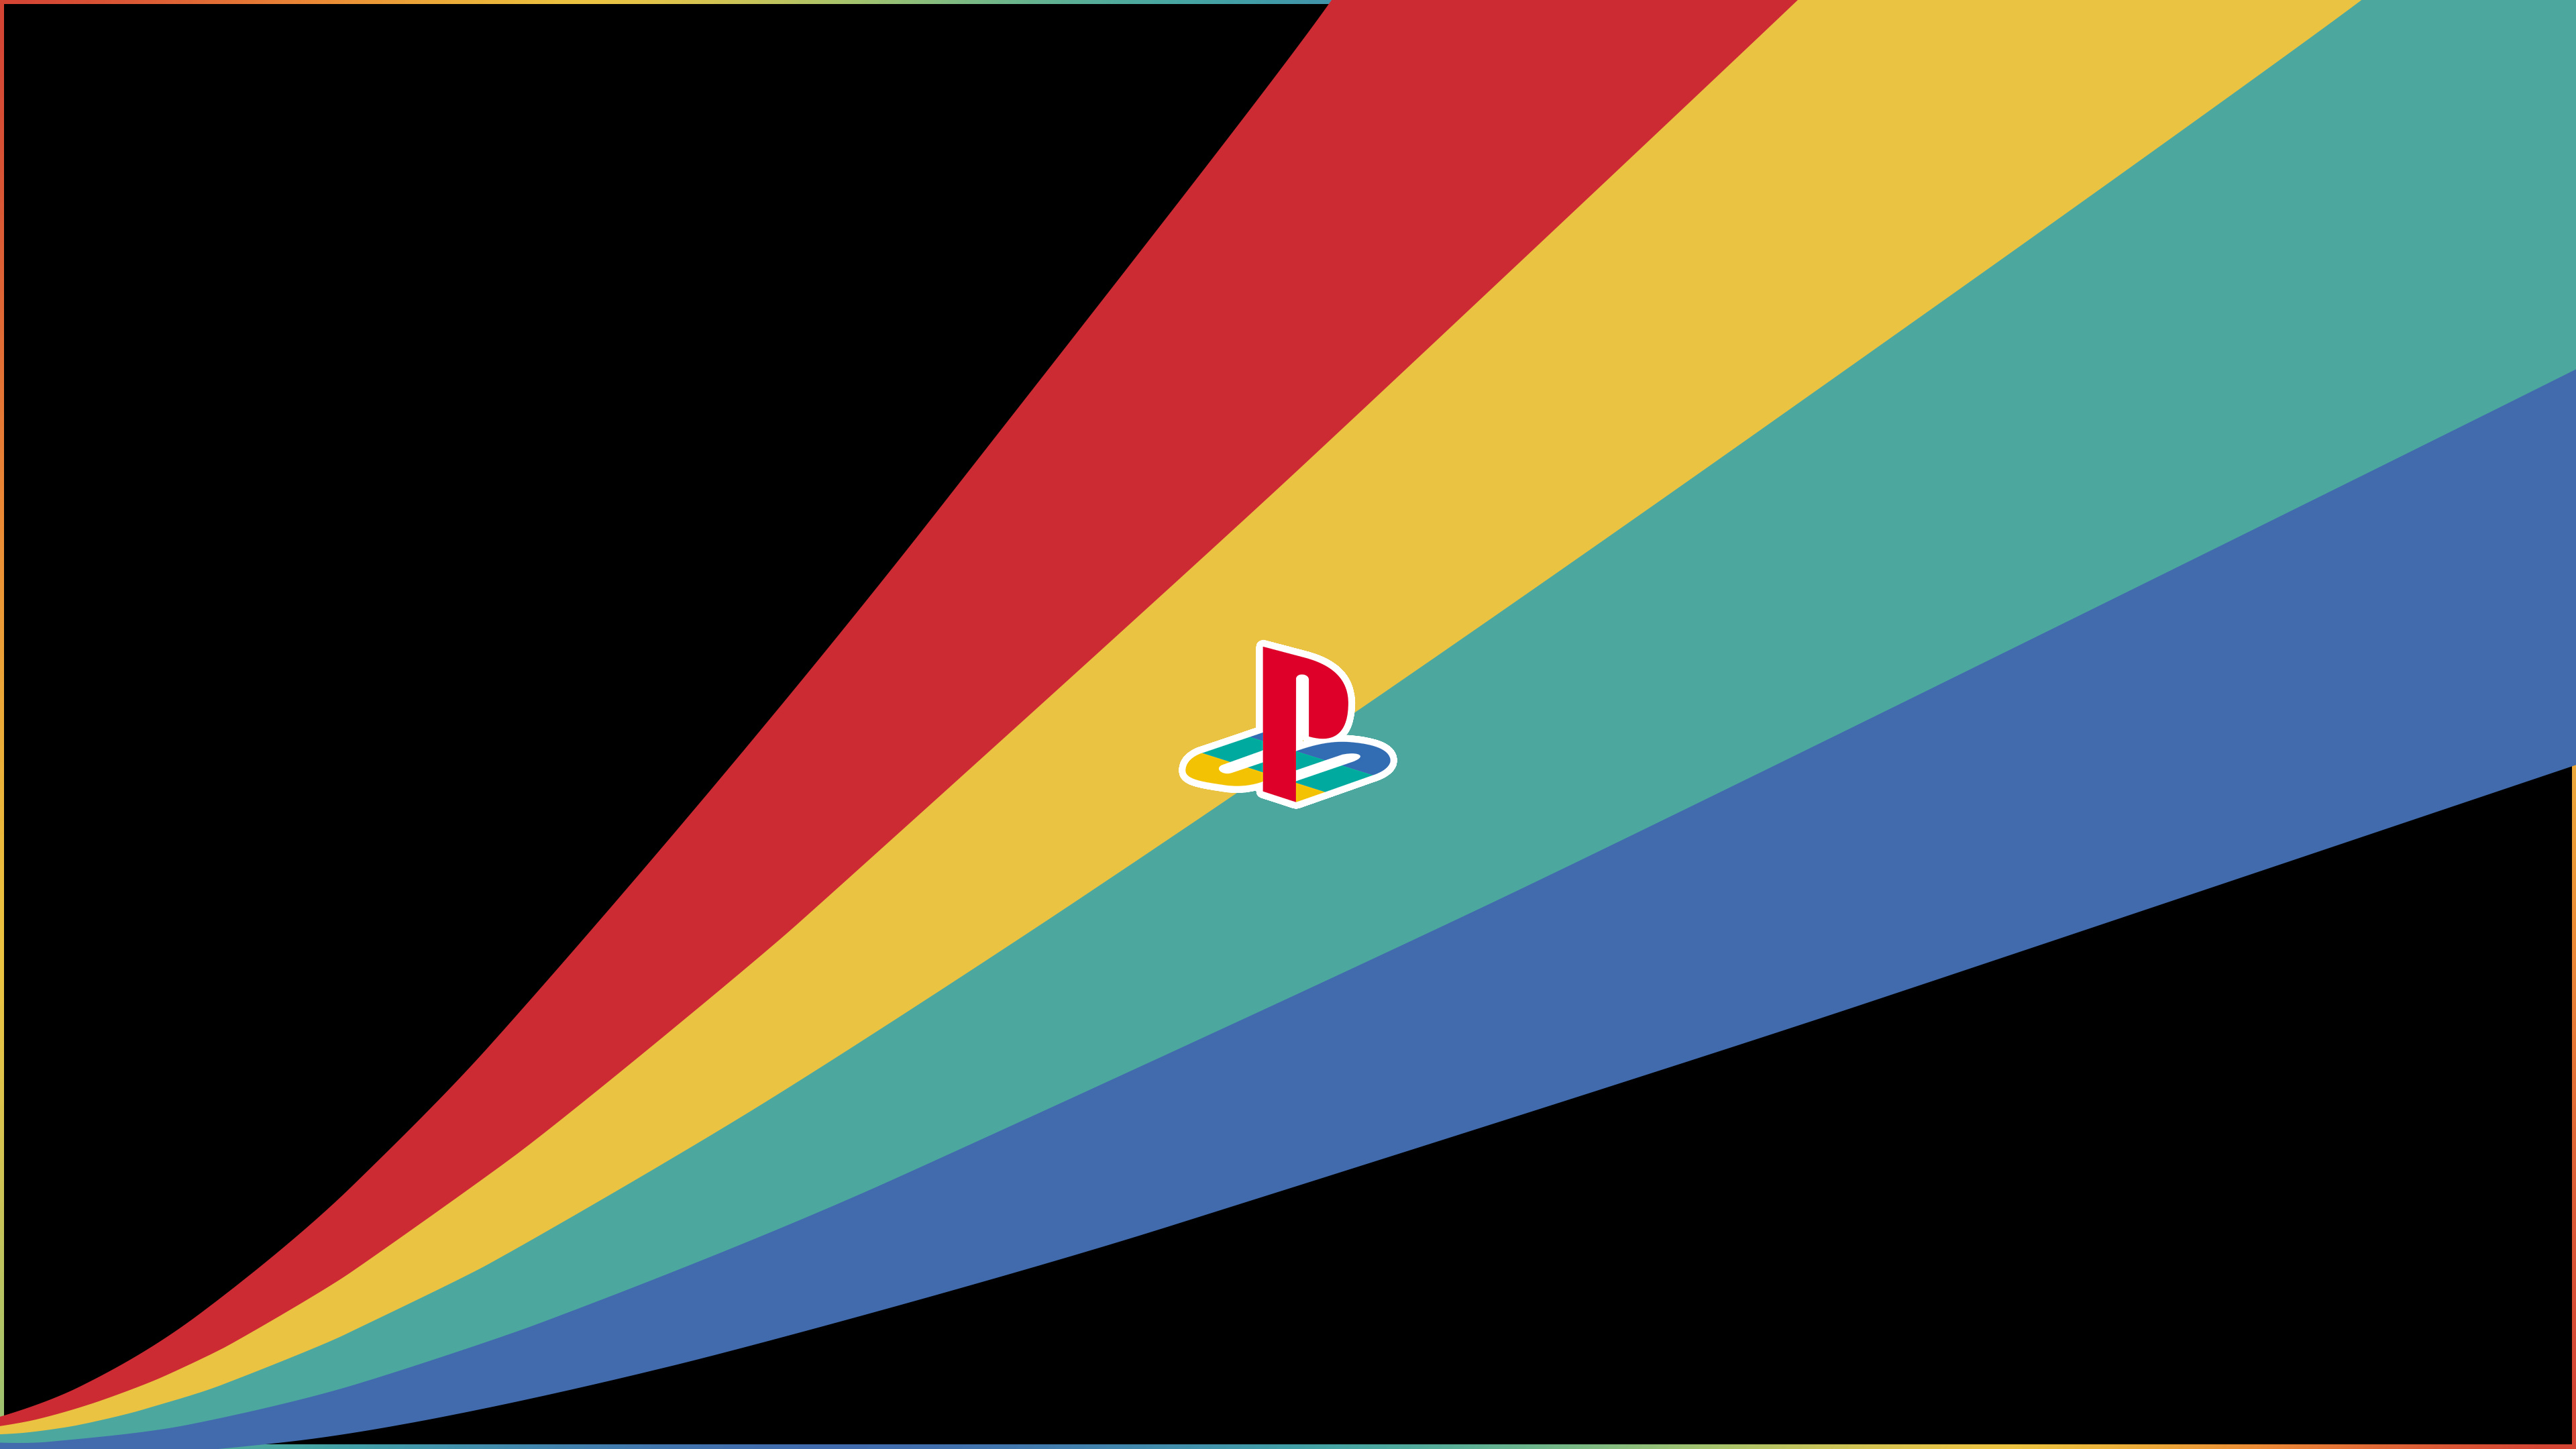 The PlayStation: Devices designed by Sony to compete with other gaming platforms, Logo. 3840x2160 4K Background.